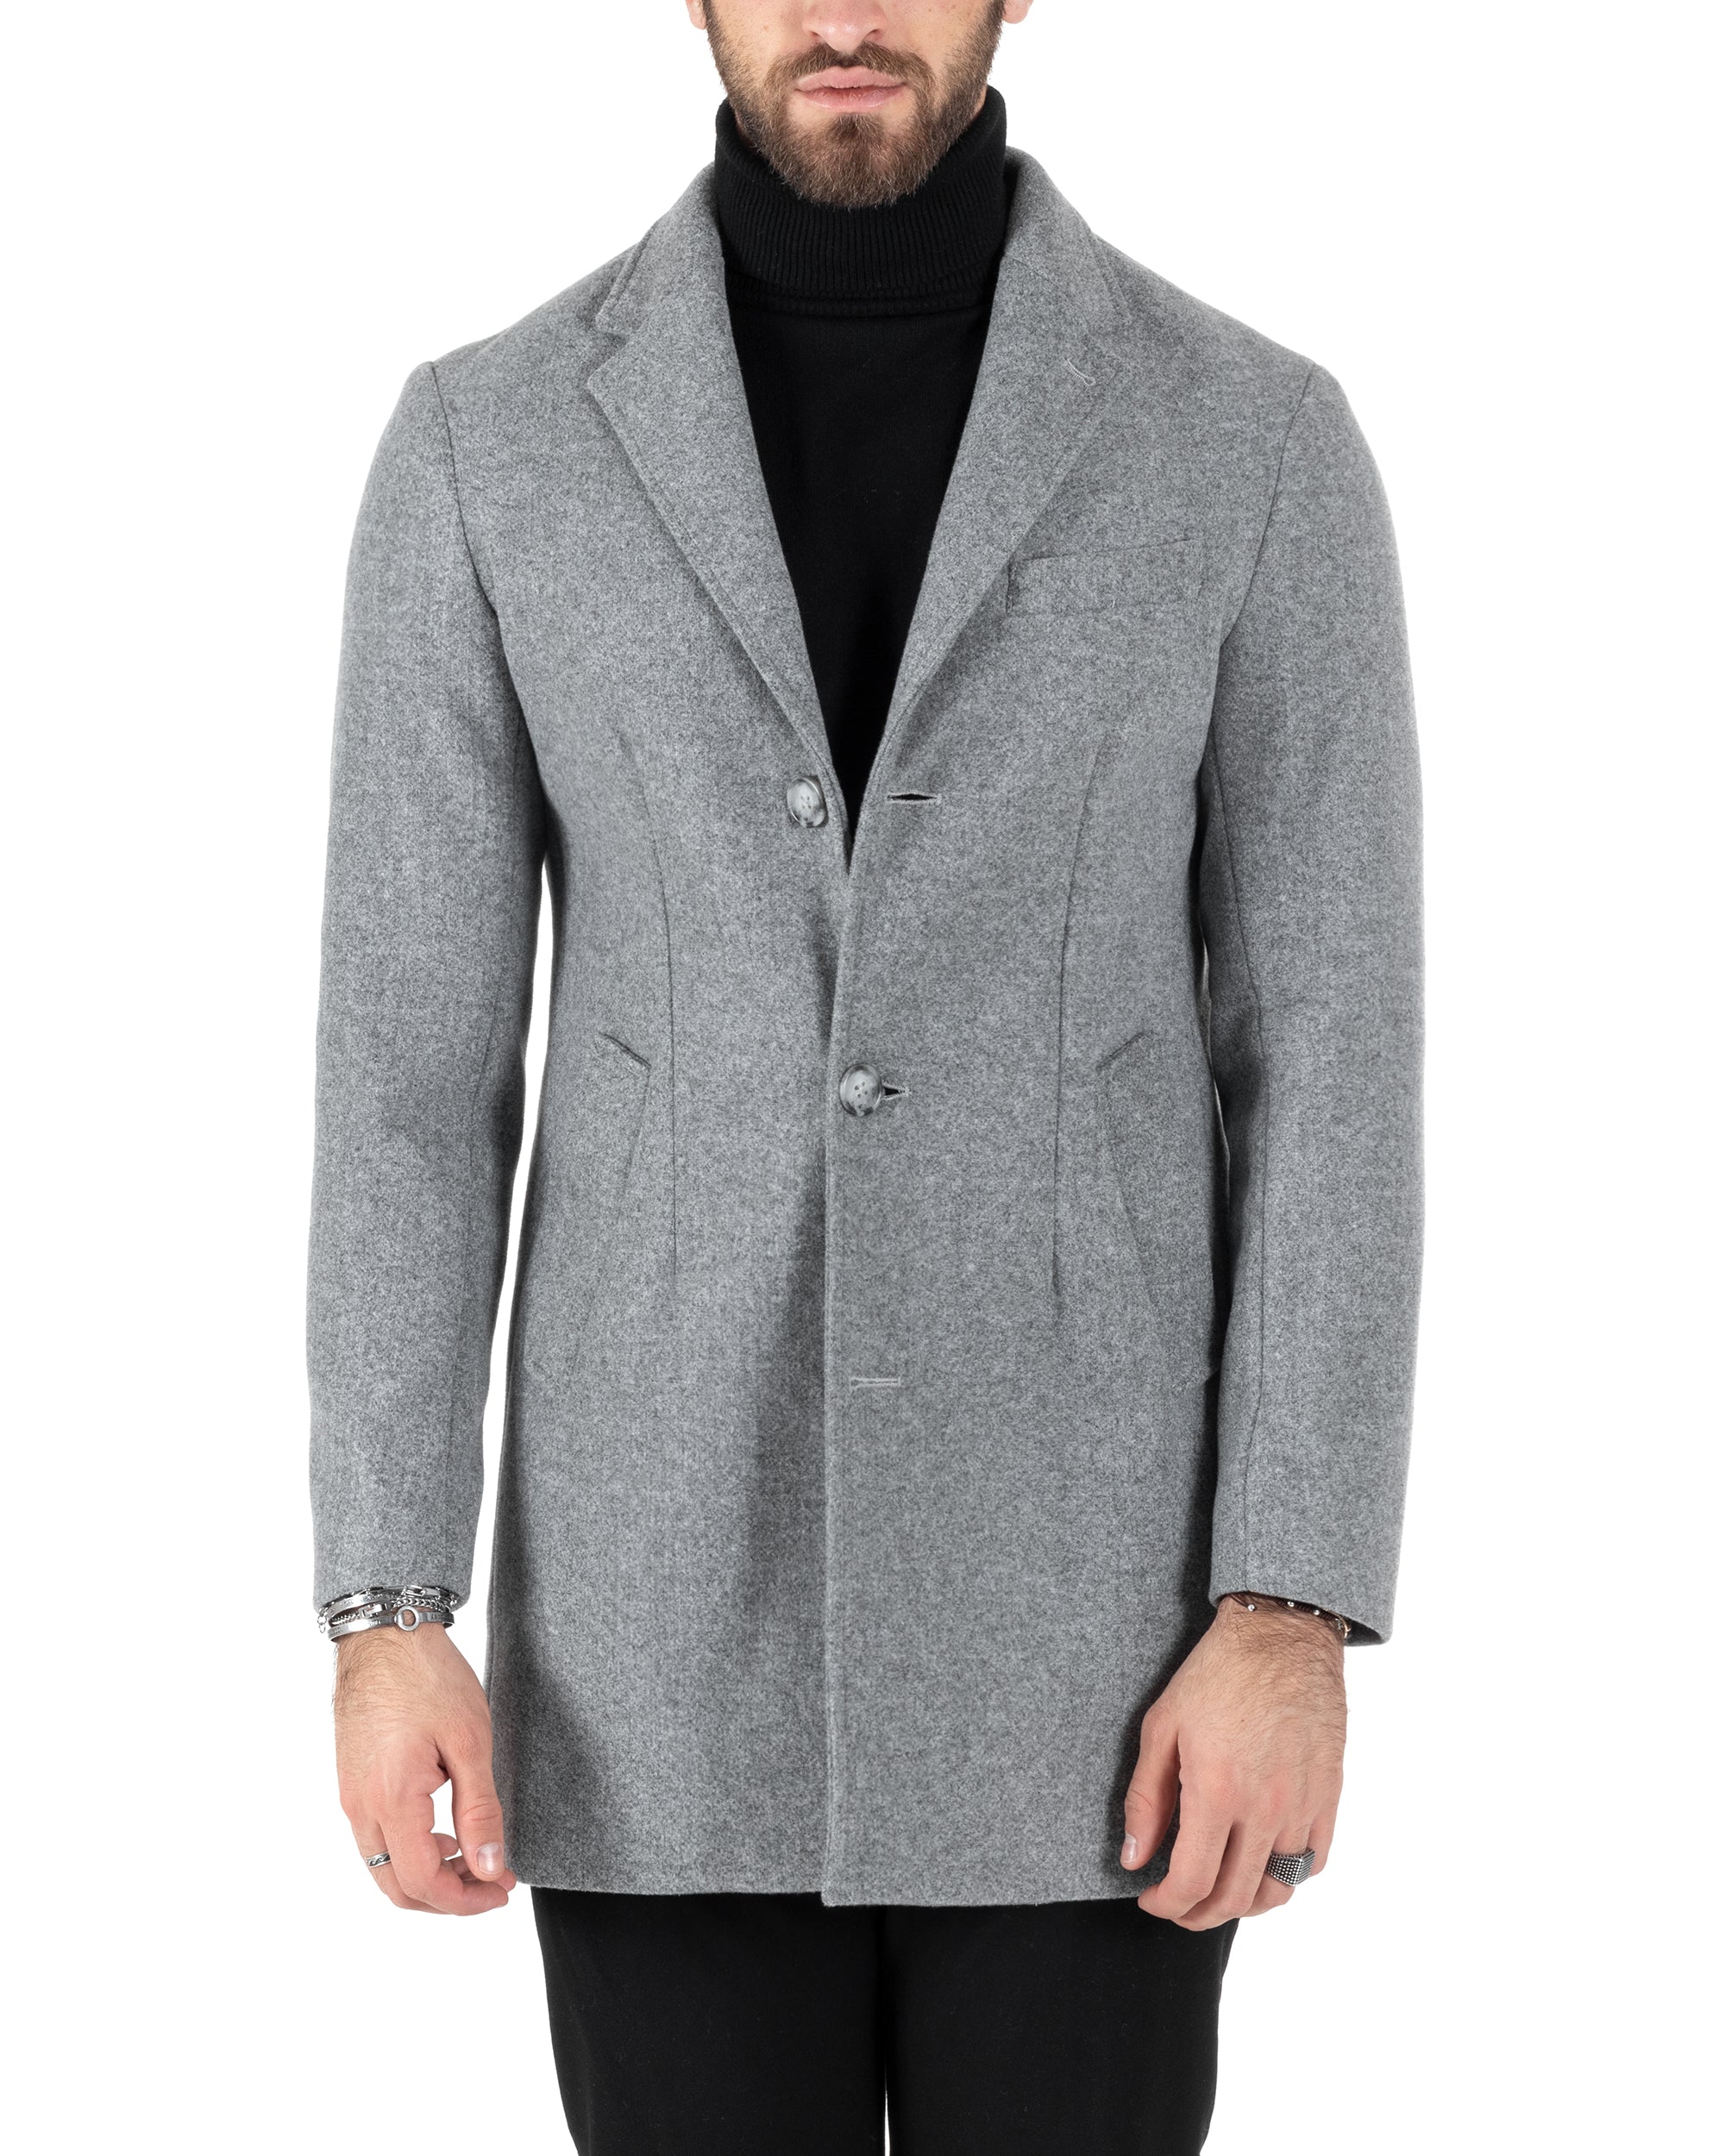 Single-Breasted Coat Men's Reverse Collar Jacket Solid Color Baronet Gray Elegant GIOSAL-G2680A